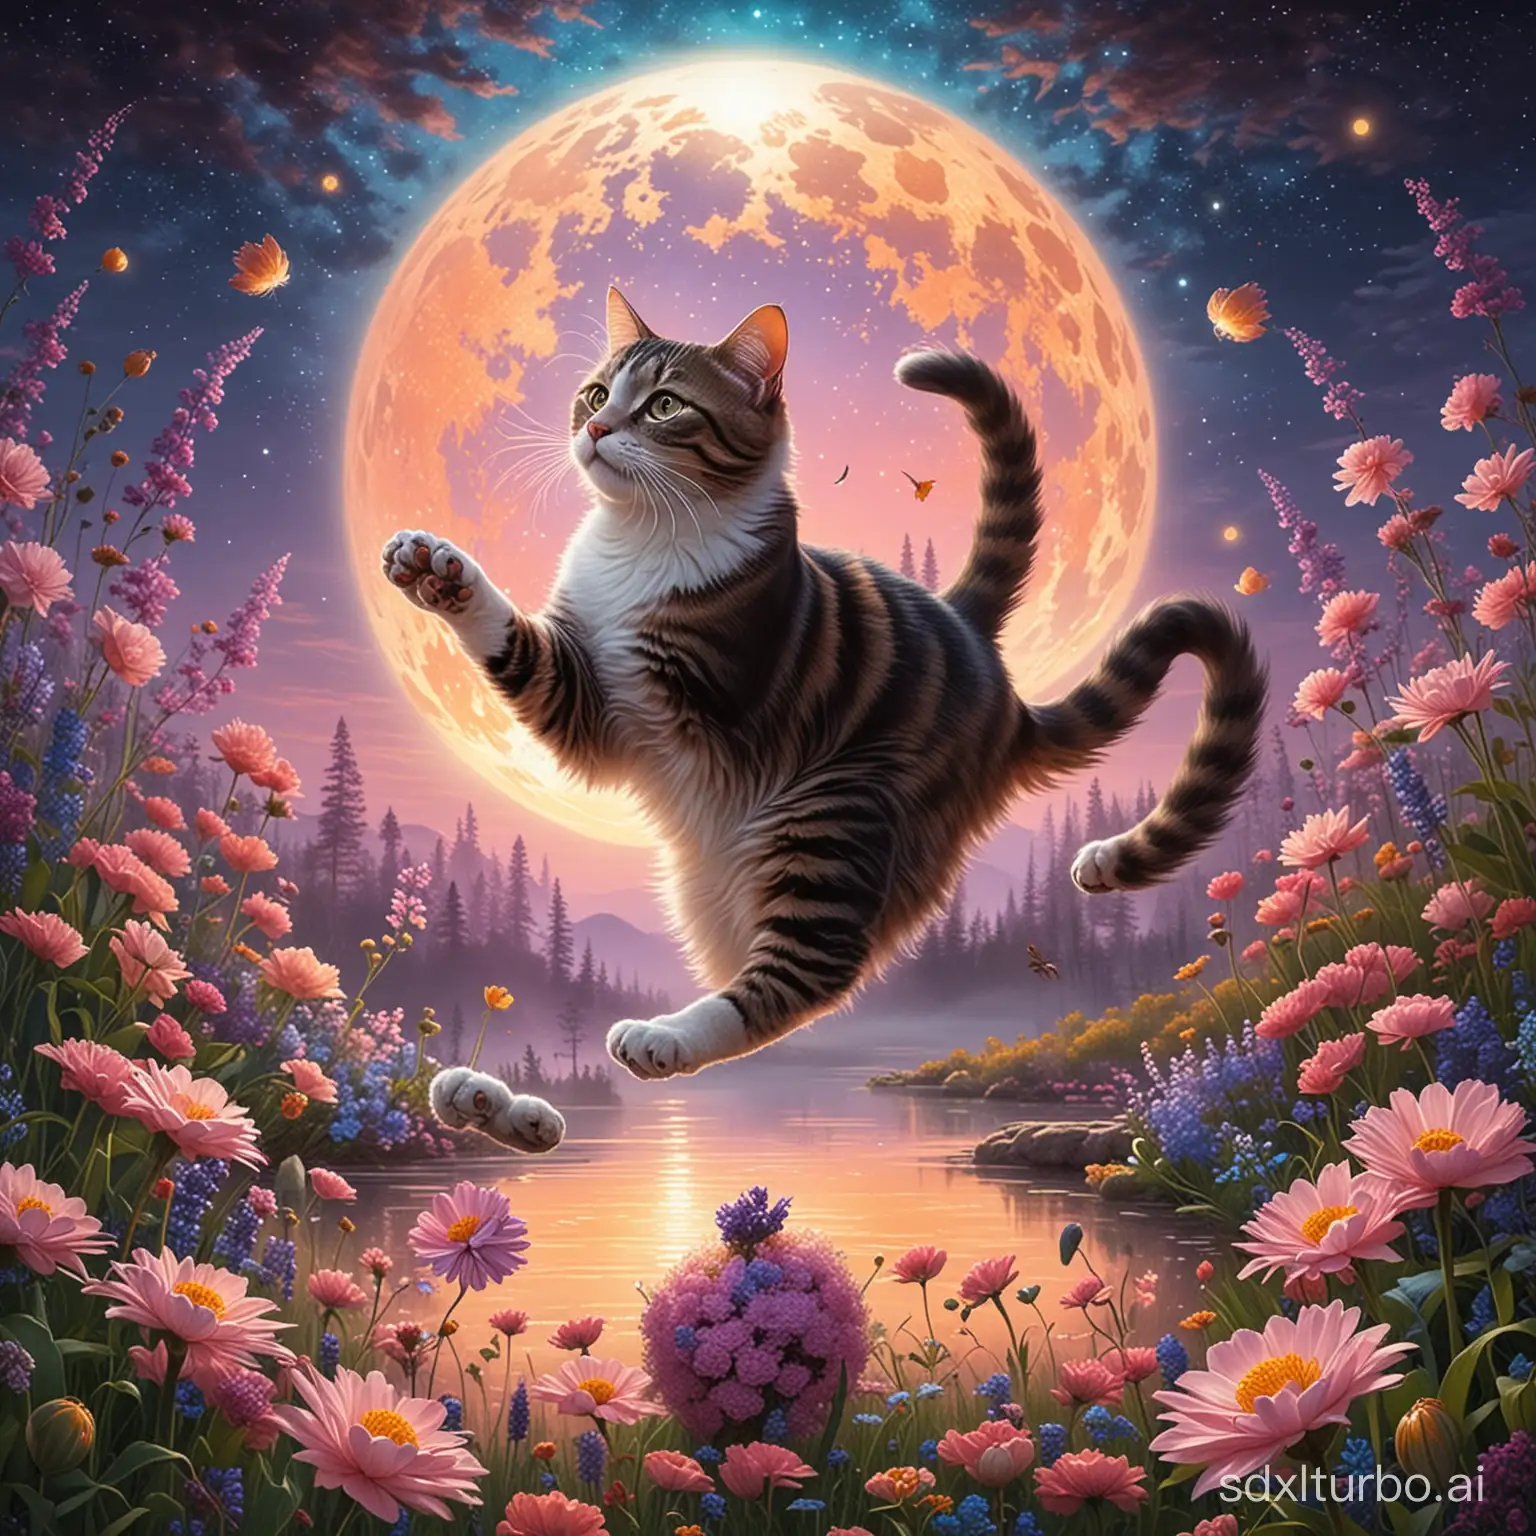 Generate the image: A graceful and playful cat balances a vibrant and blooming flower orb on its paws, while floating effortlessly in the soft and celestial glow of a moonlit sky. The cat's eyes sparkle with mirth as it twirls the flower around with dexterity, creating a dreamy and surreal landscape that evokes a sense of fantasy and whimsy.